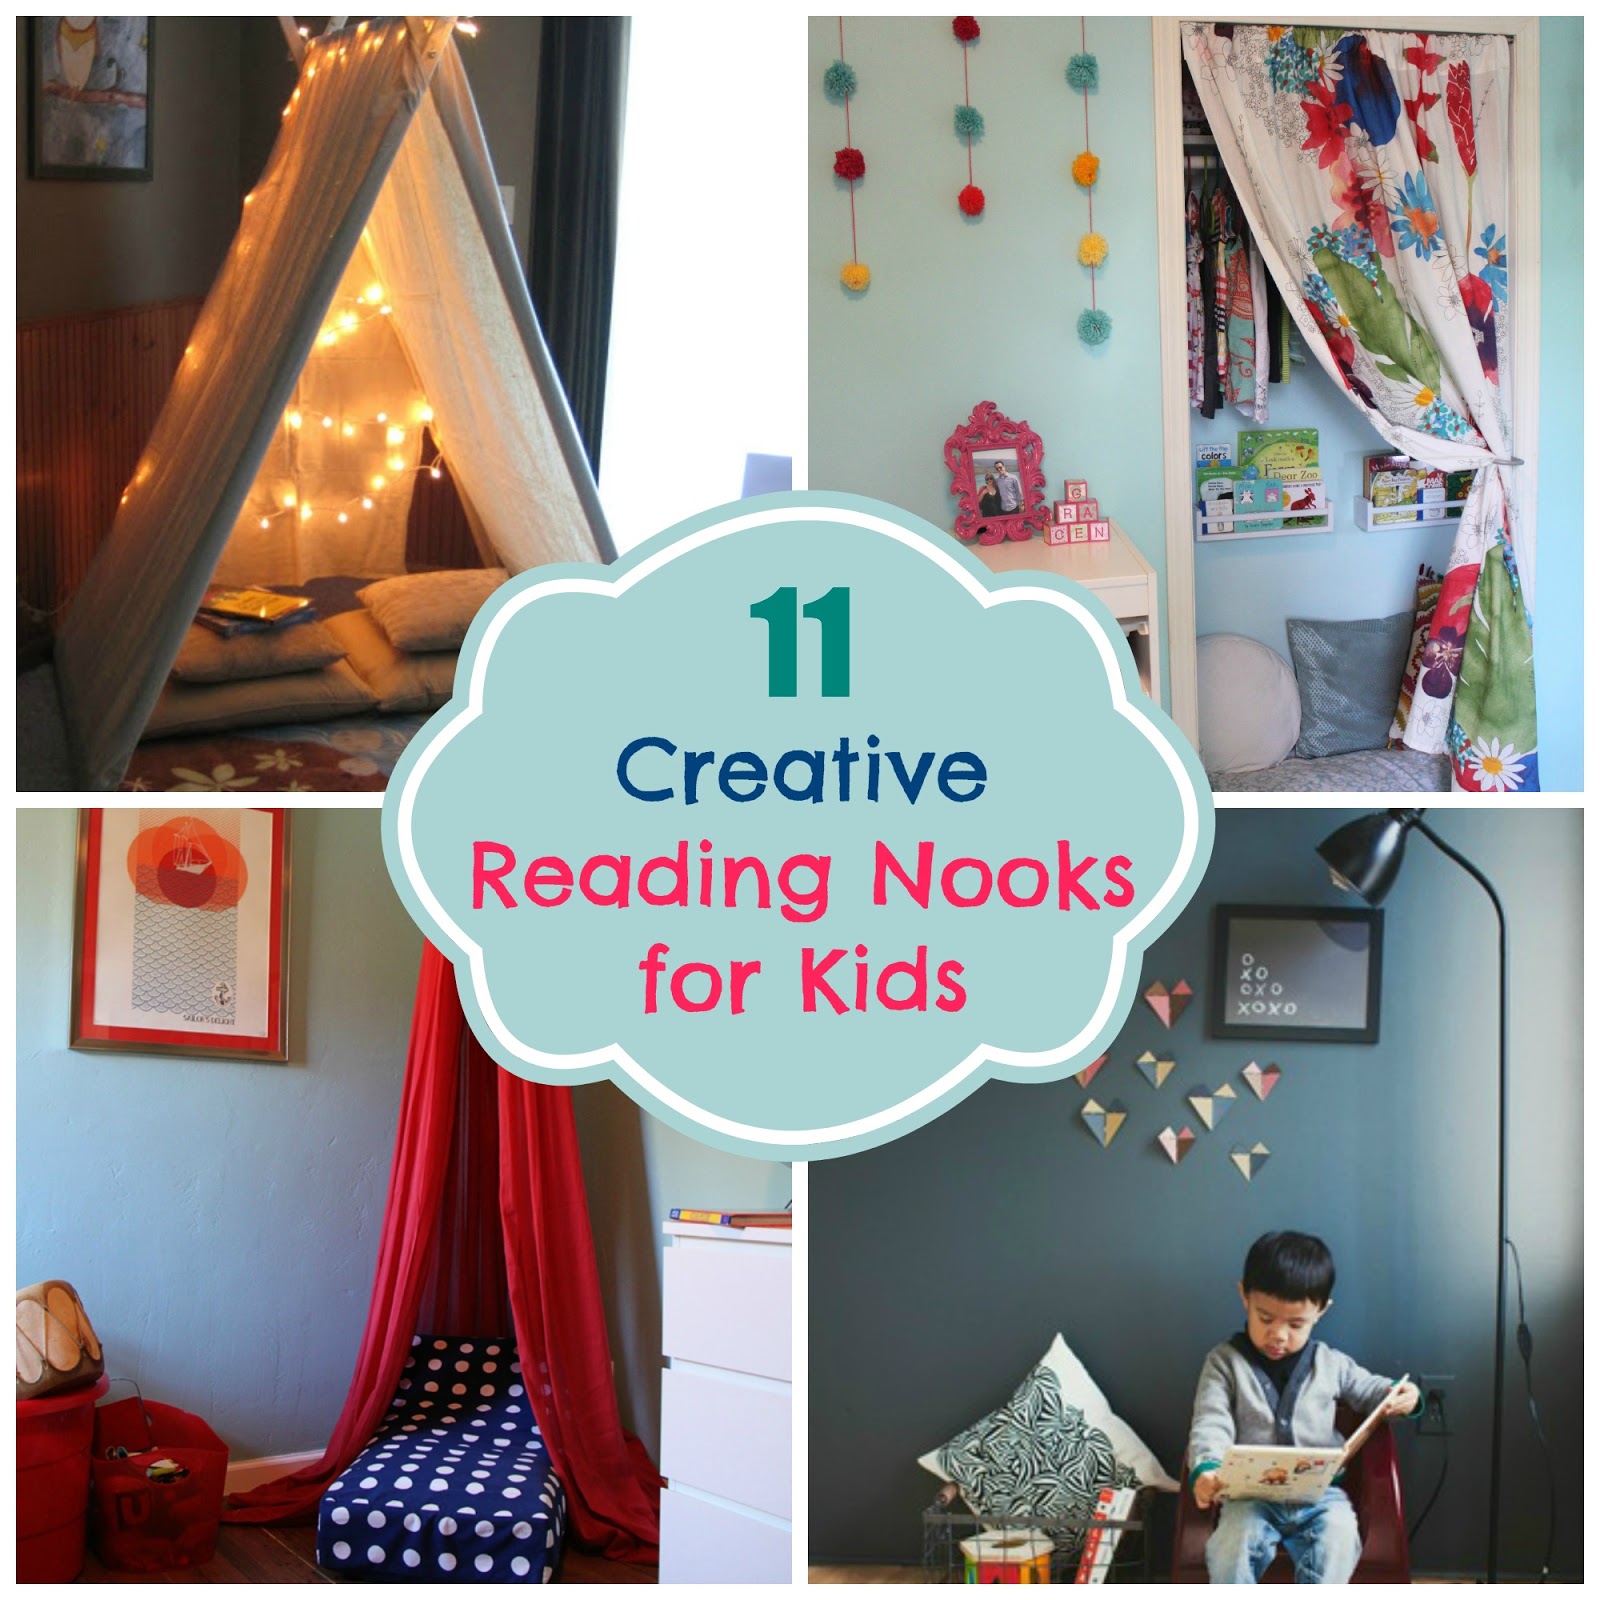 Thrive 360 Living: 11 Creative Reading Nooks for Kids